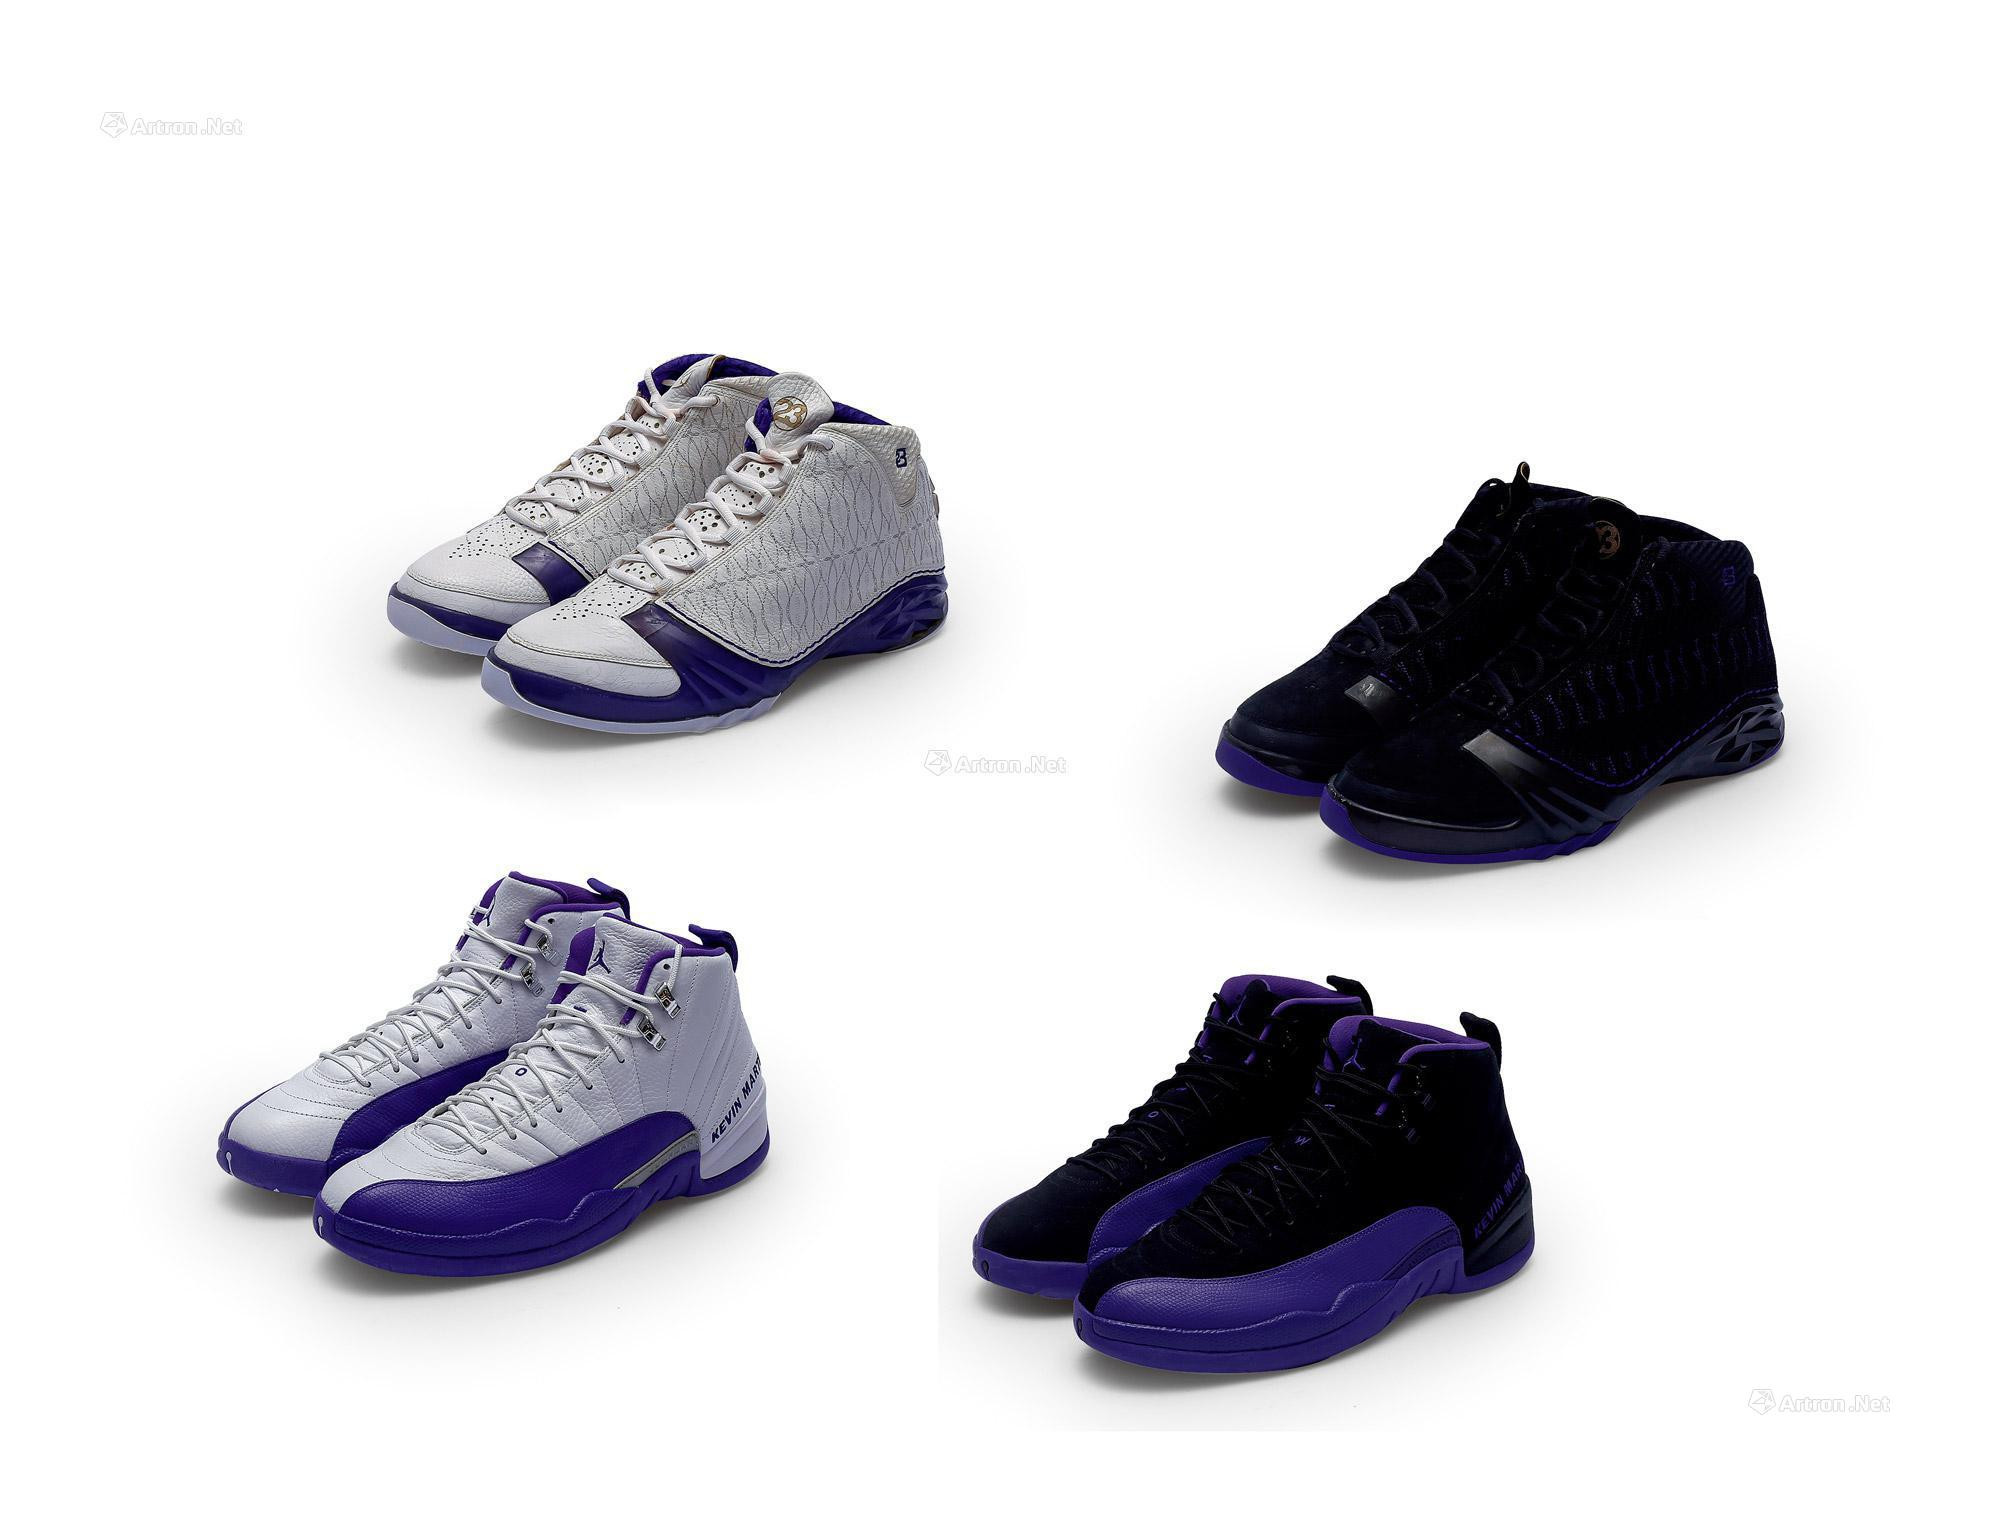 Kevin Martin Exclusive Sneaker Collection  4 Pairs of Player Exclusive Sneakers